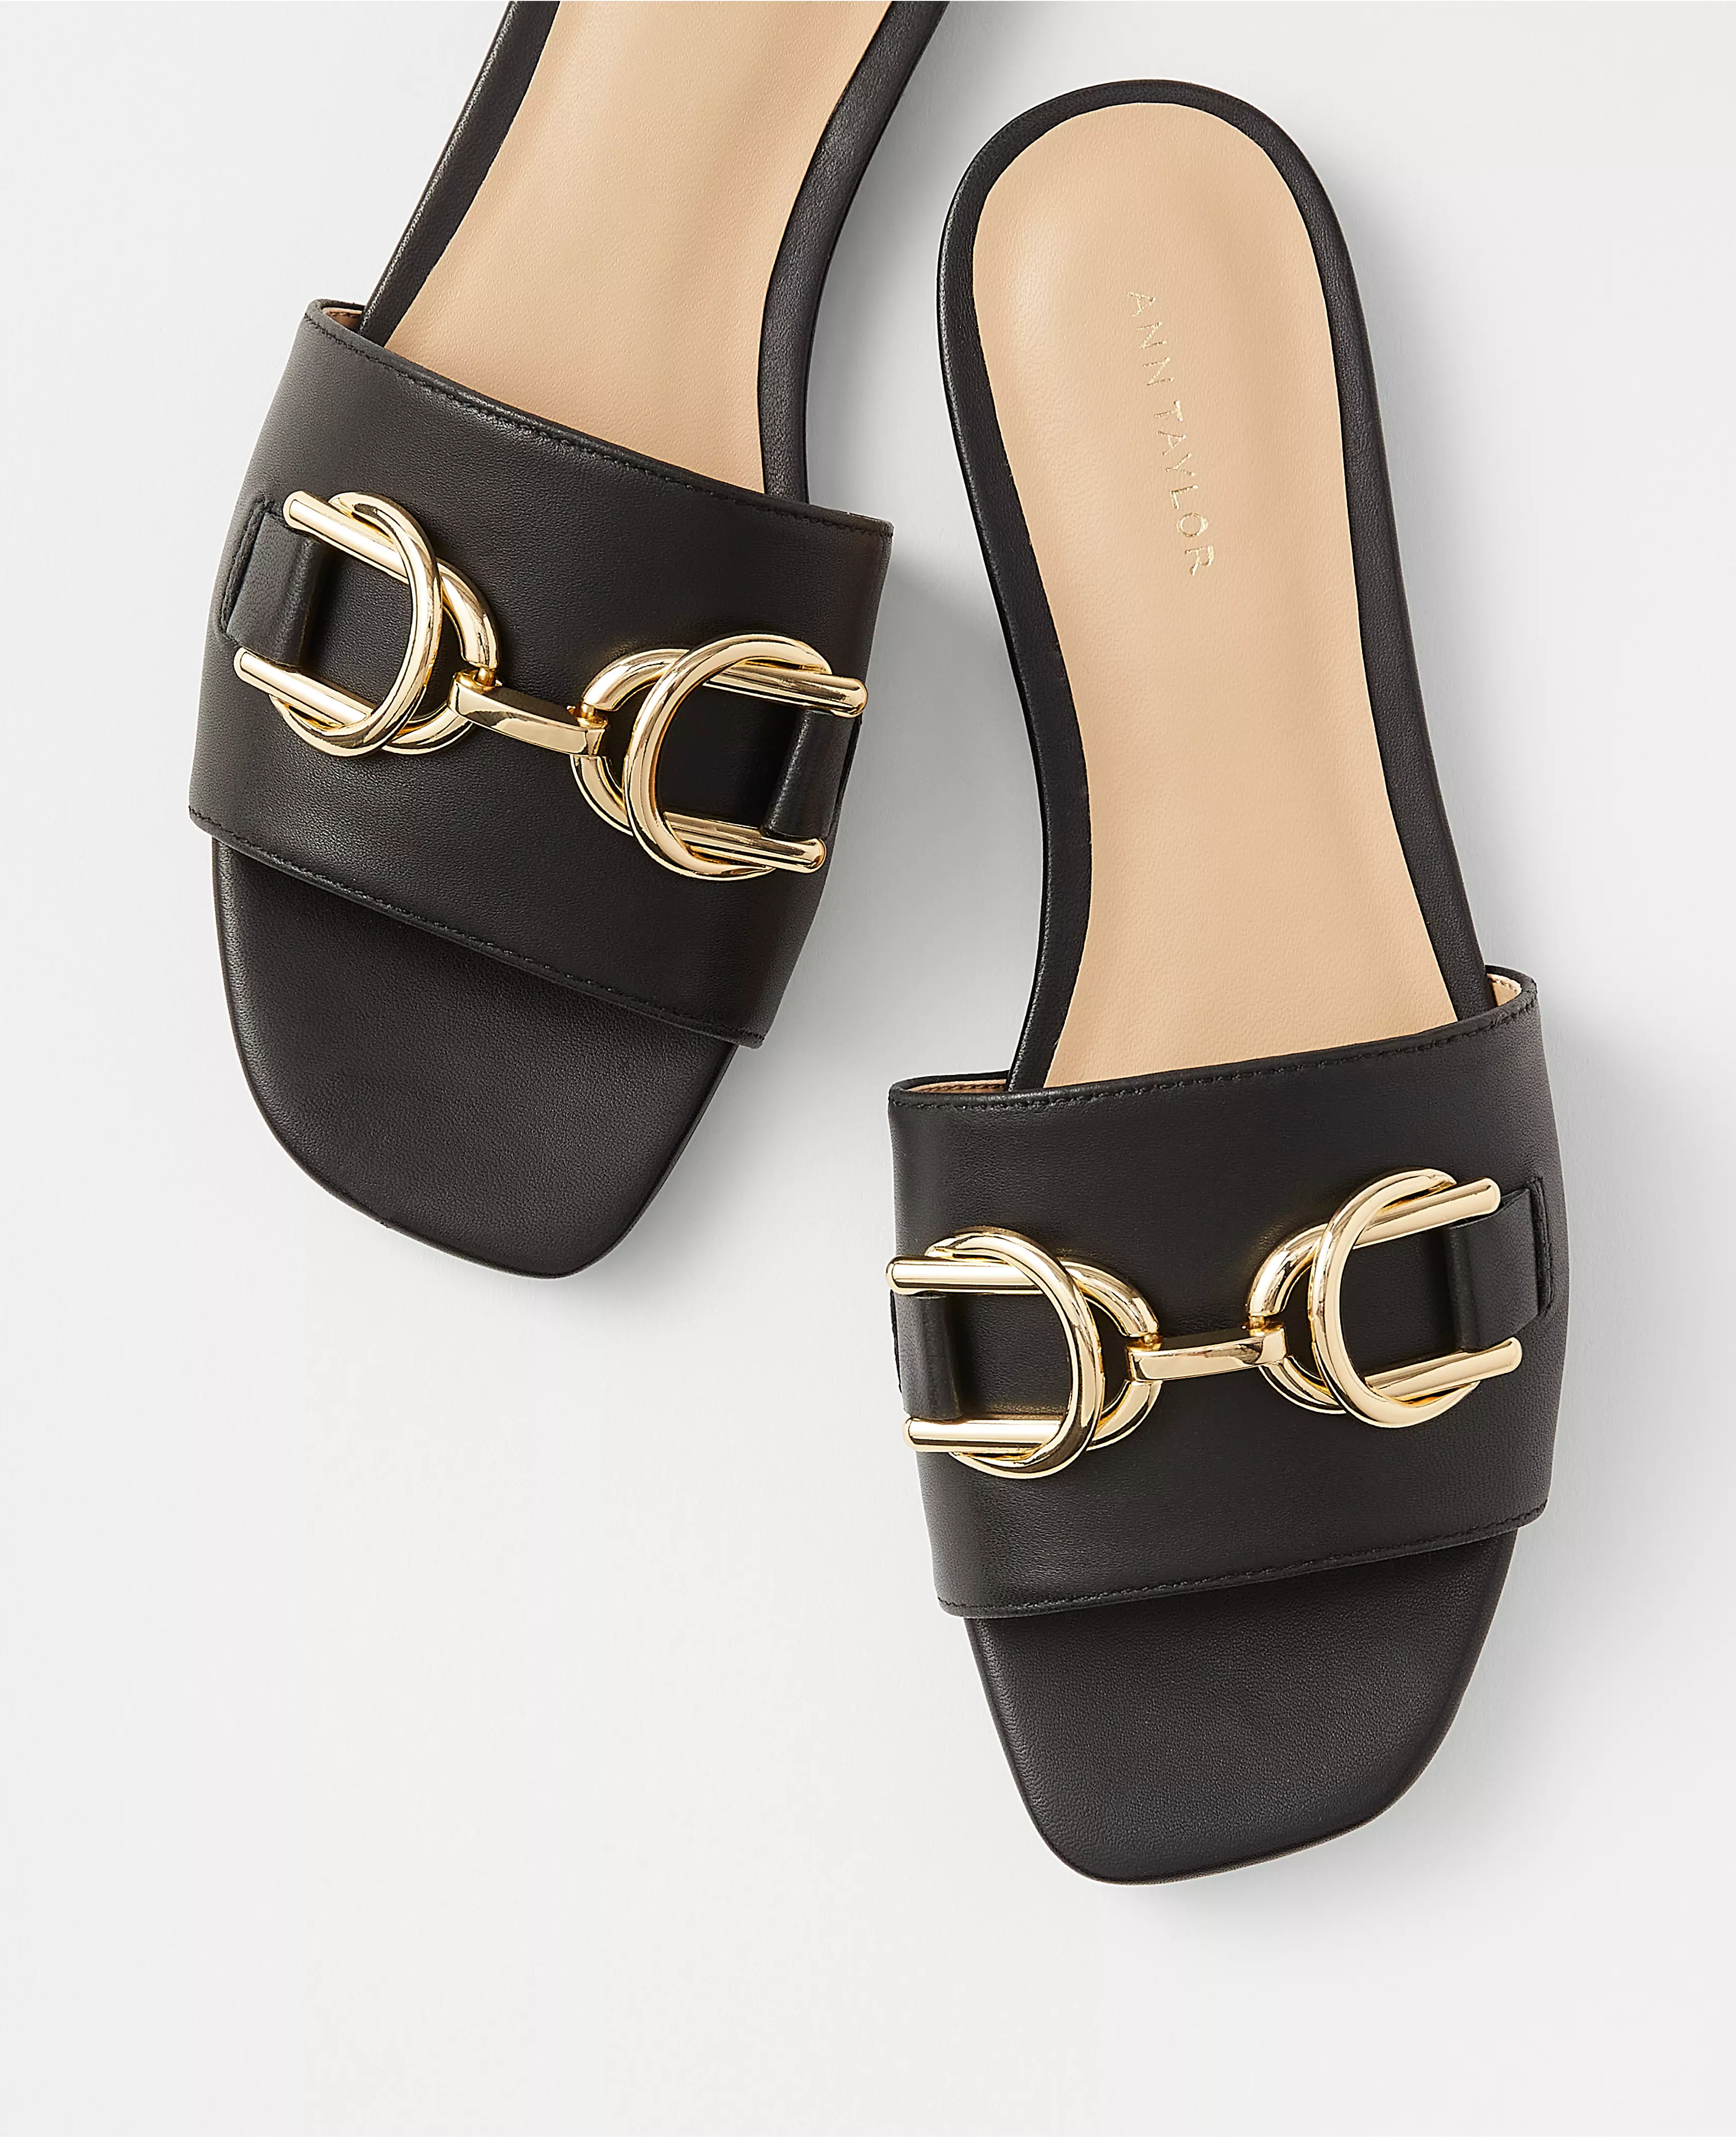 AT Weekend Chain Leather Flat Sandals